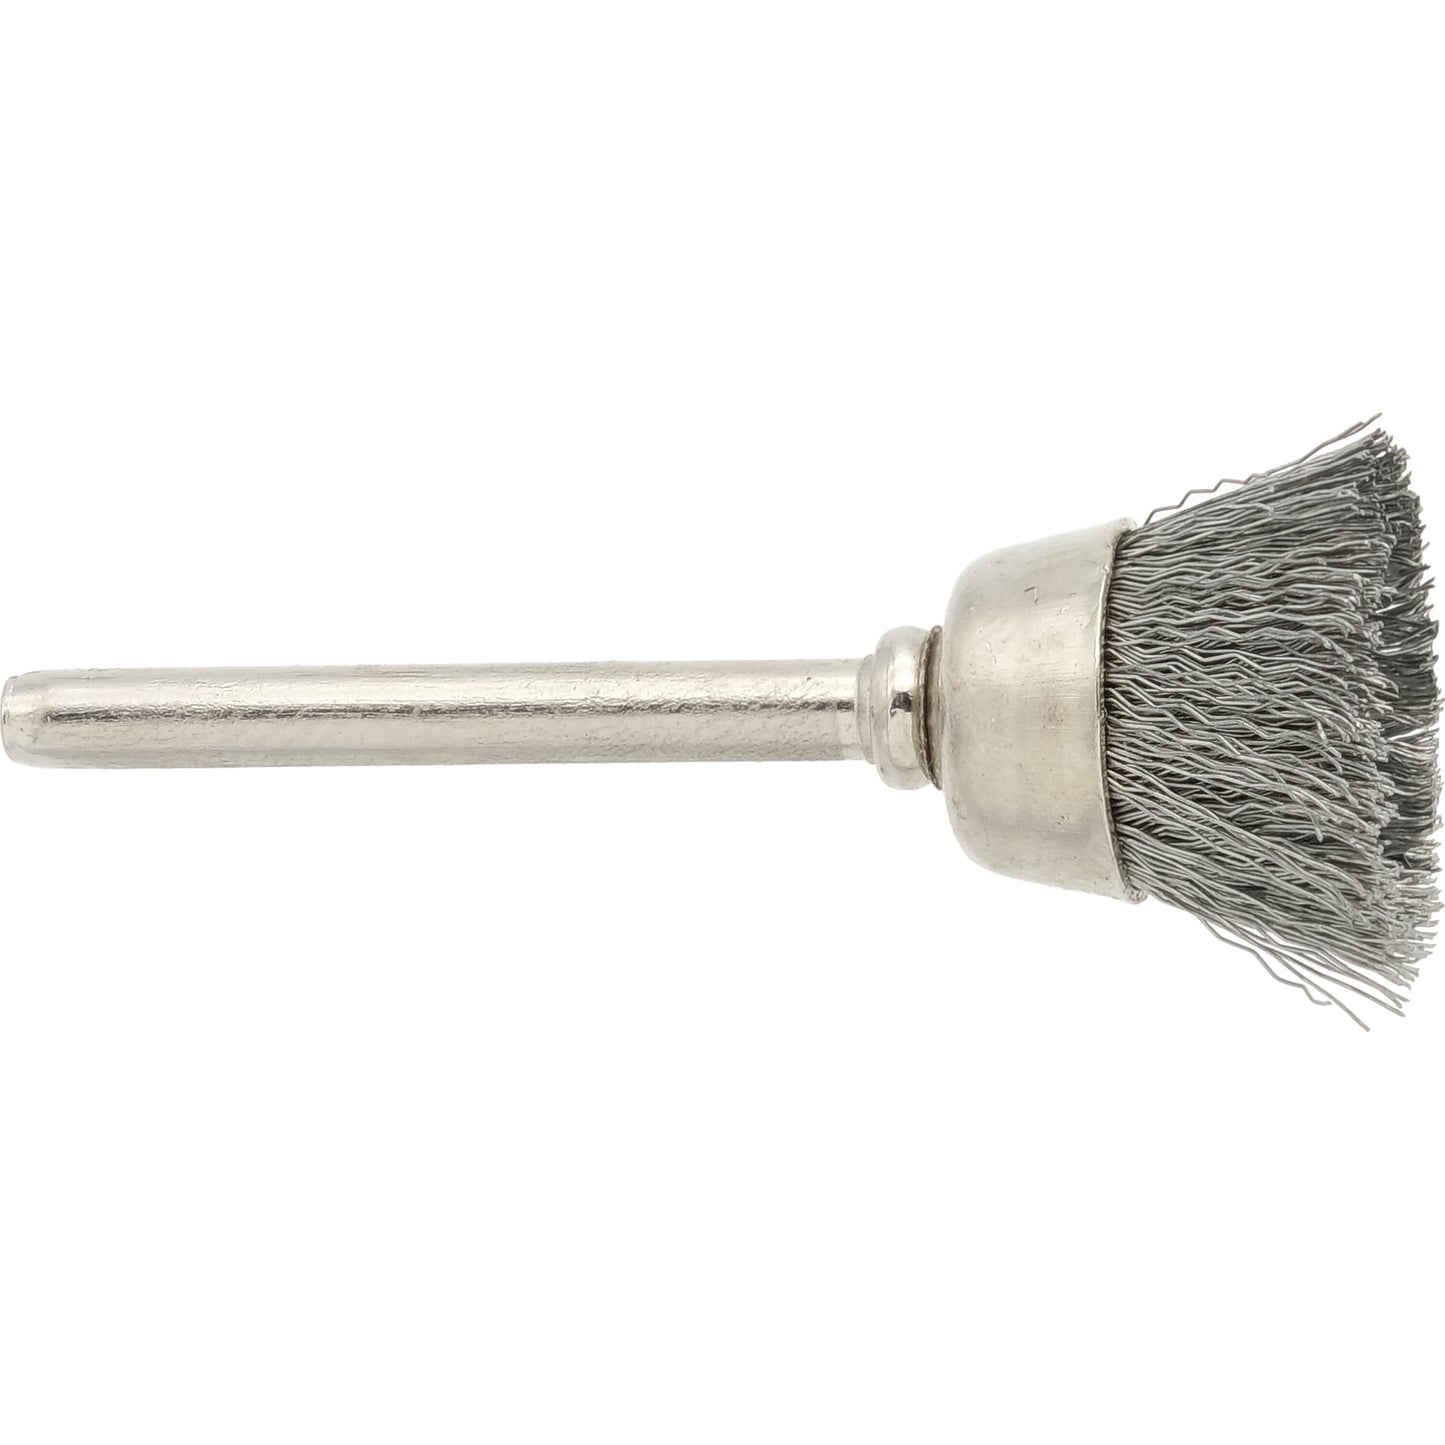 Cup Brushes Steel 3/4" 12Pcs